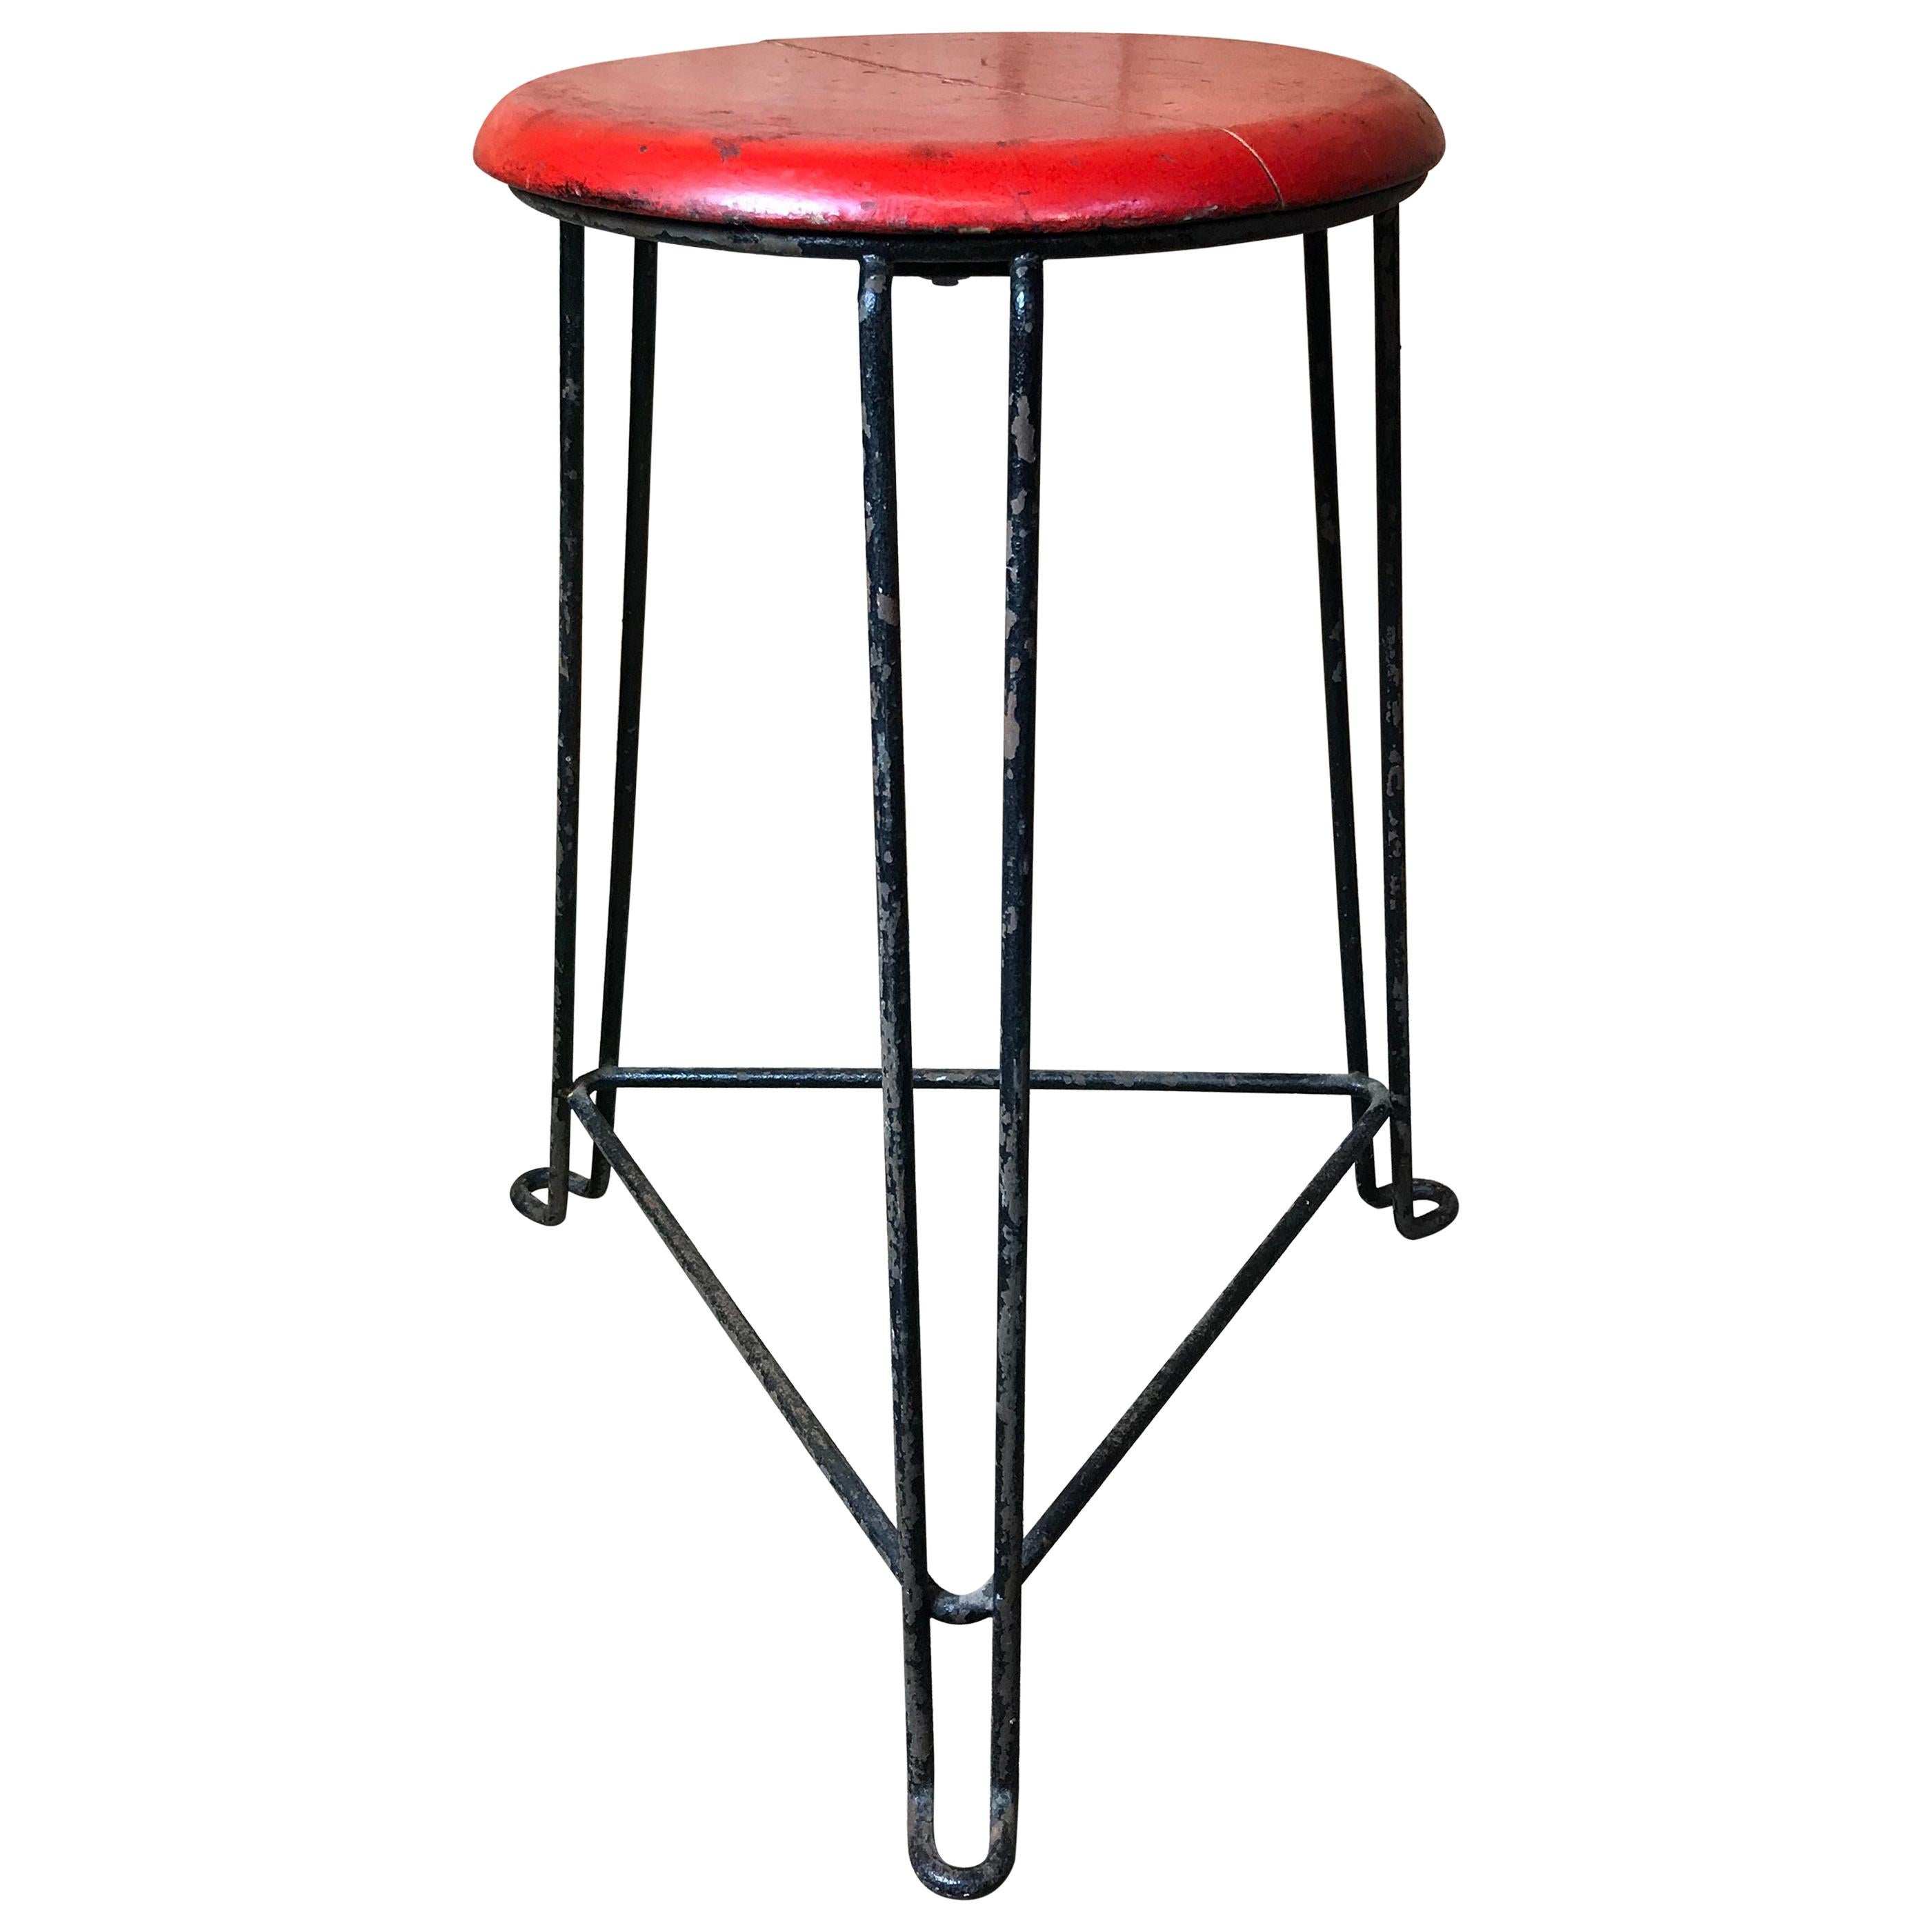 Retro 1960s Wooden Seat with Metal Frame Tomado Stool 'Red Seat'